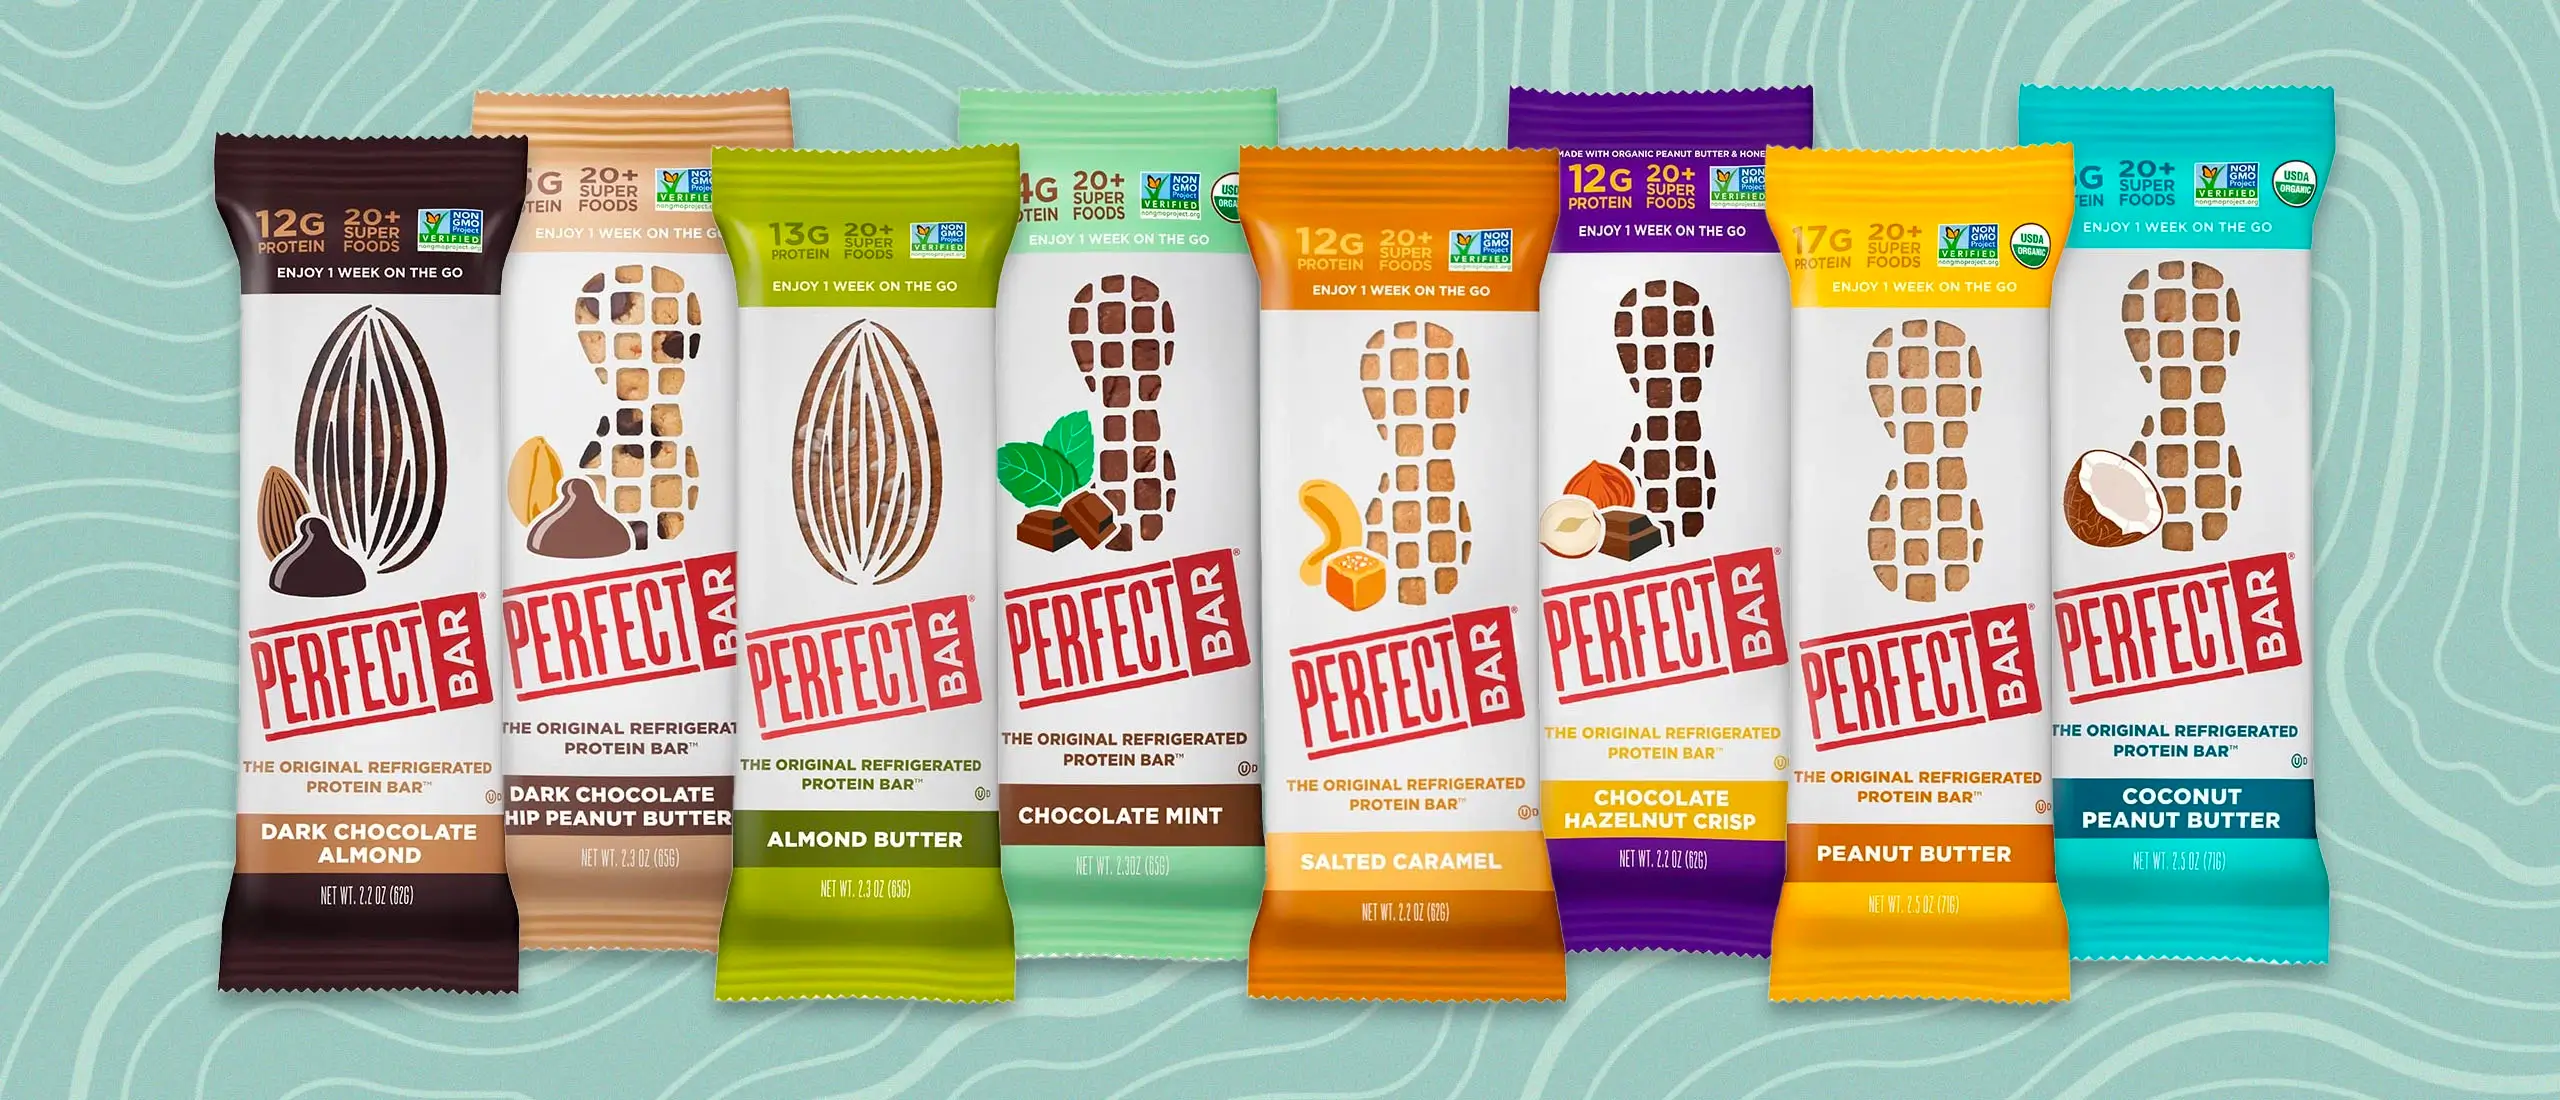 Perfect bars in every glorious flavor.